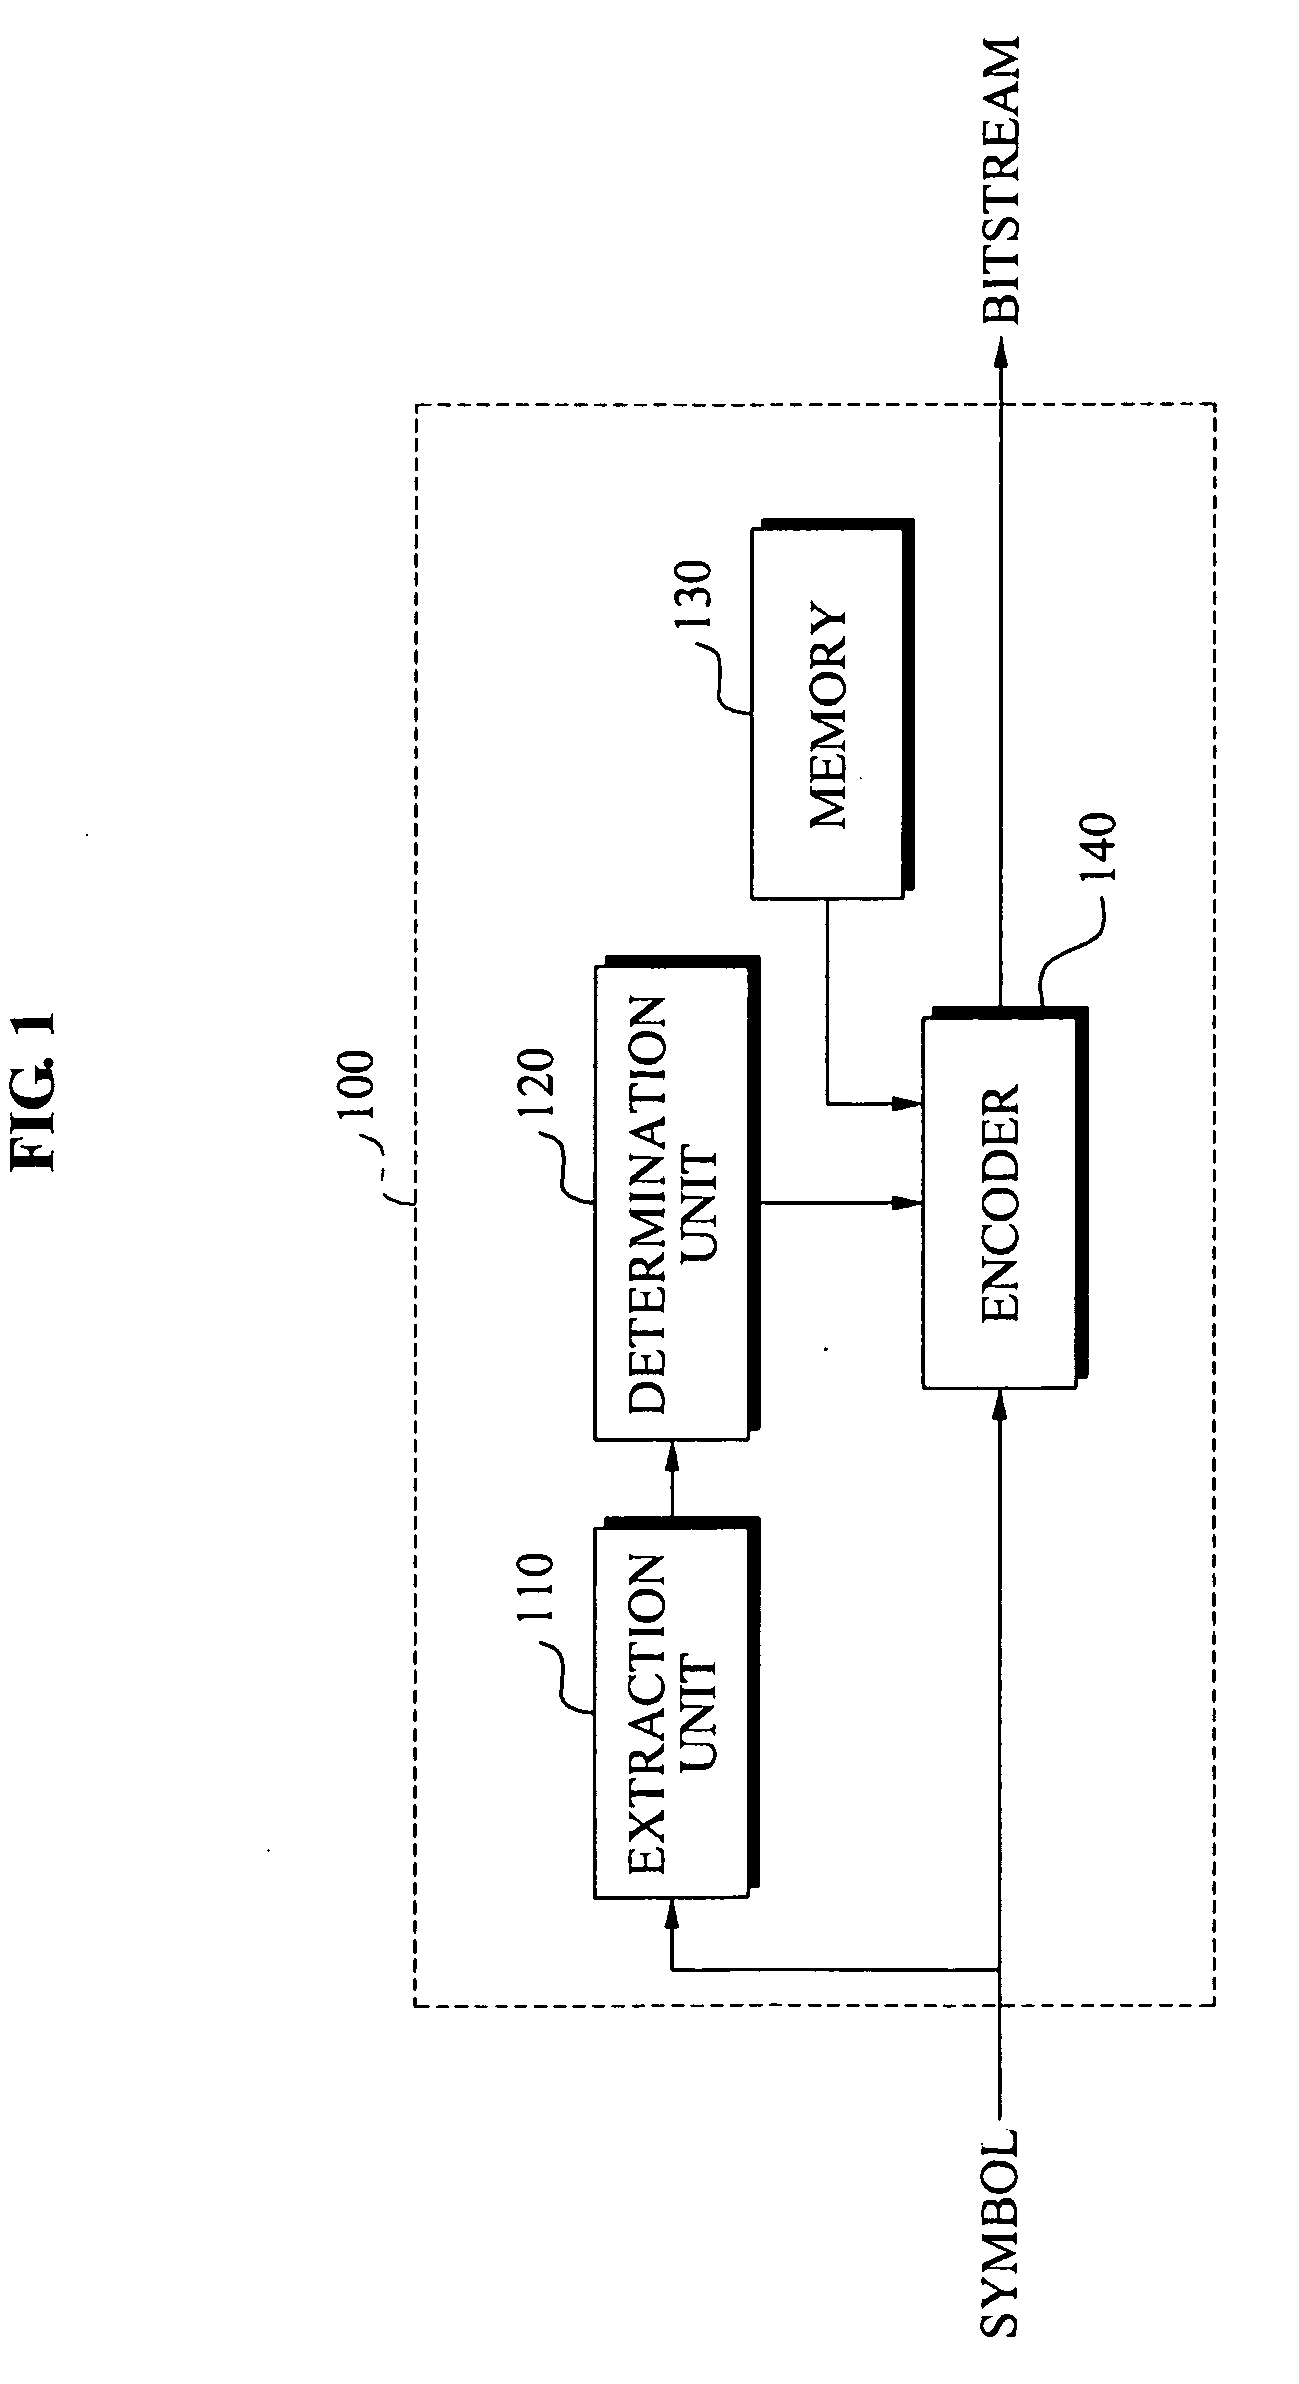 Apparatus and method for lossless coding and decoding